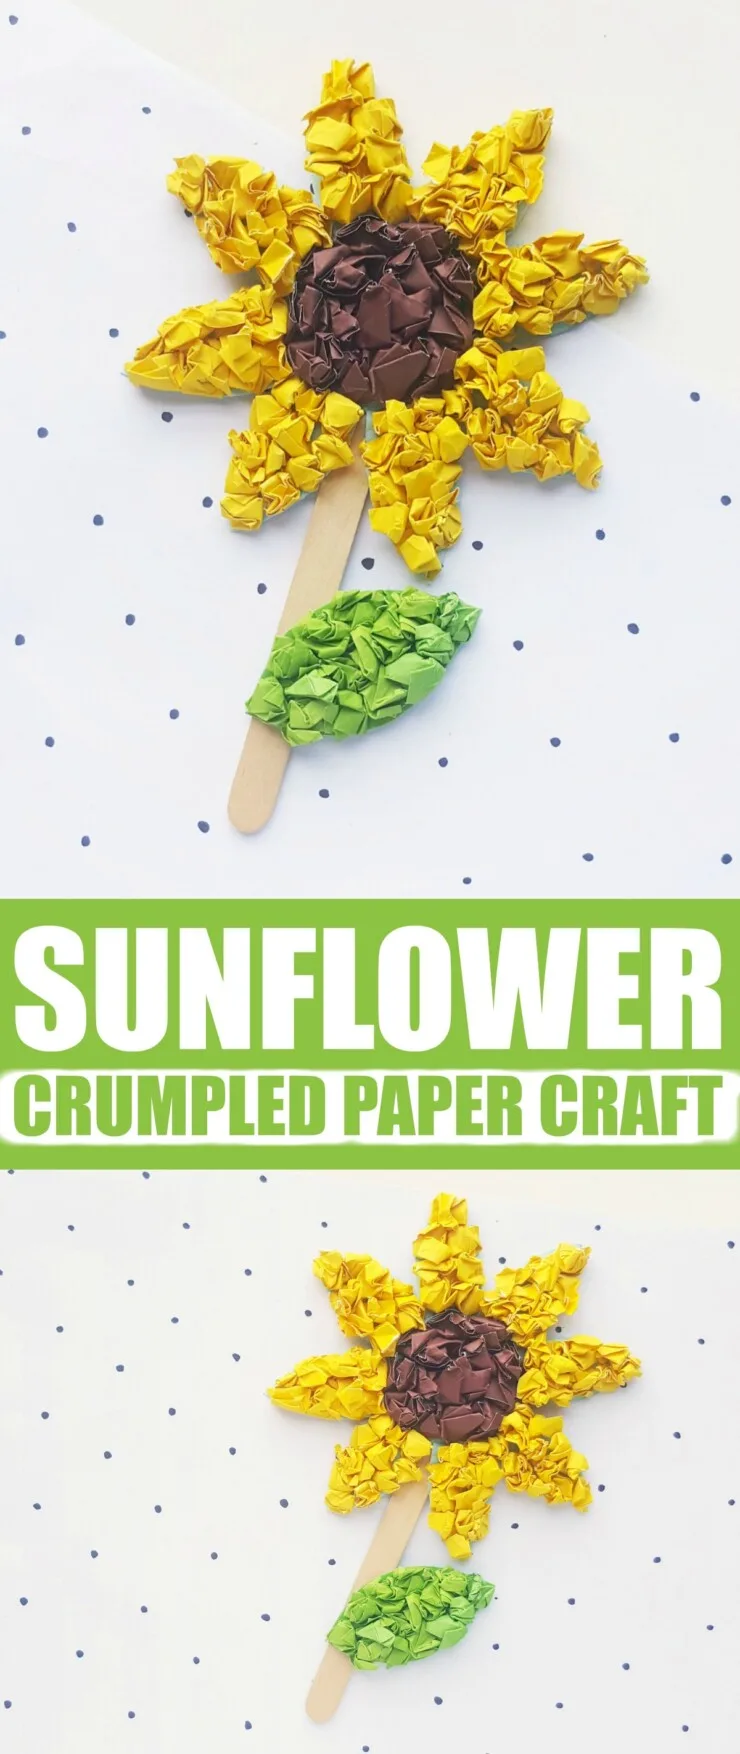 This Crumpled Paper Sunflower Craft is a fun summer craft for kids. The free printable sunflower template makes it an easy craft for anyone from preschoolers and up!